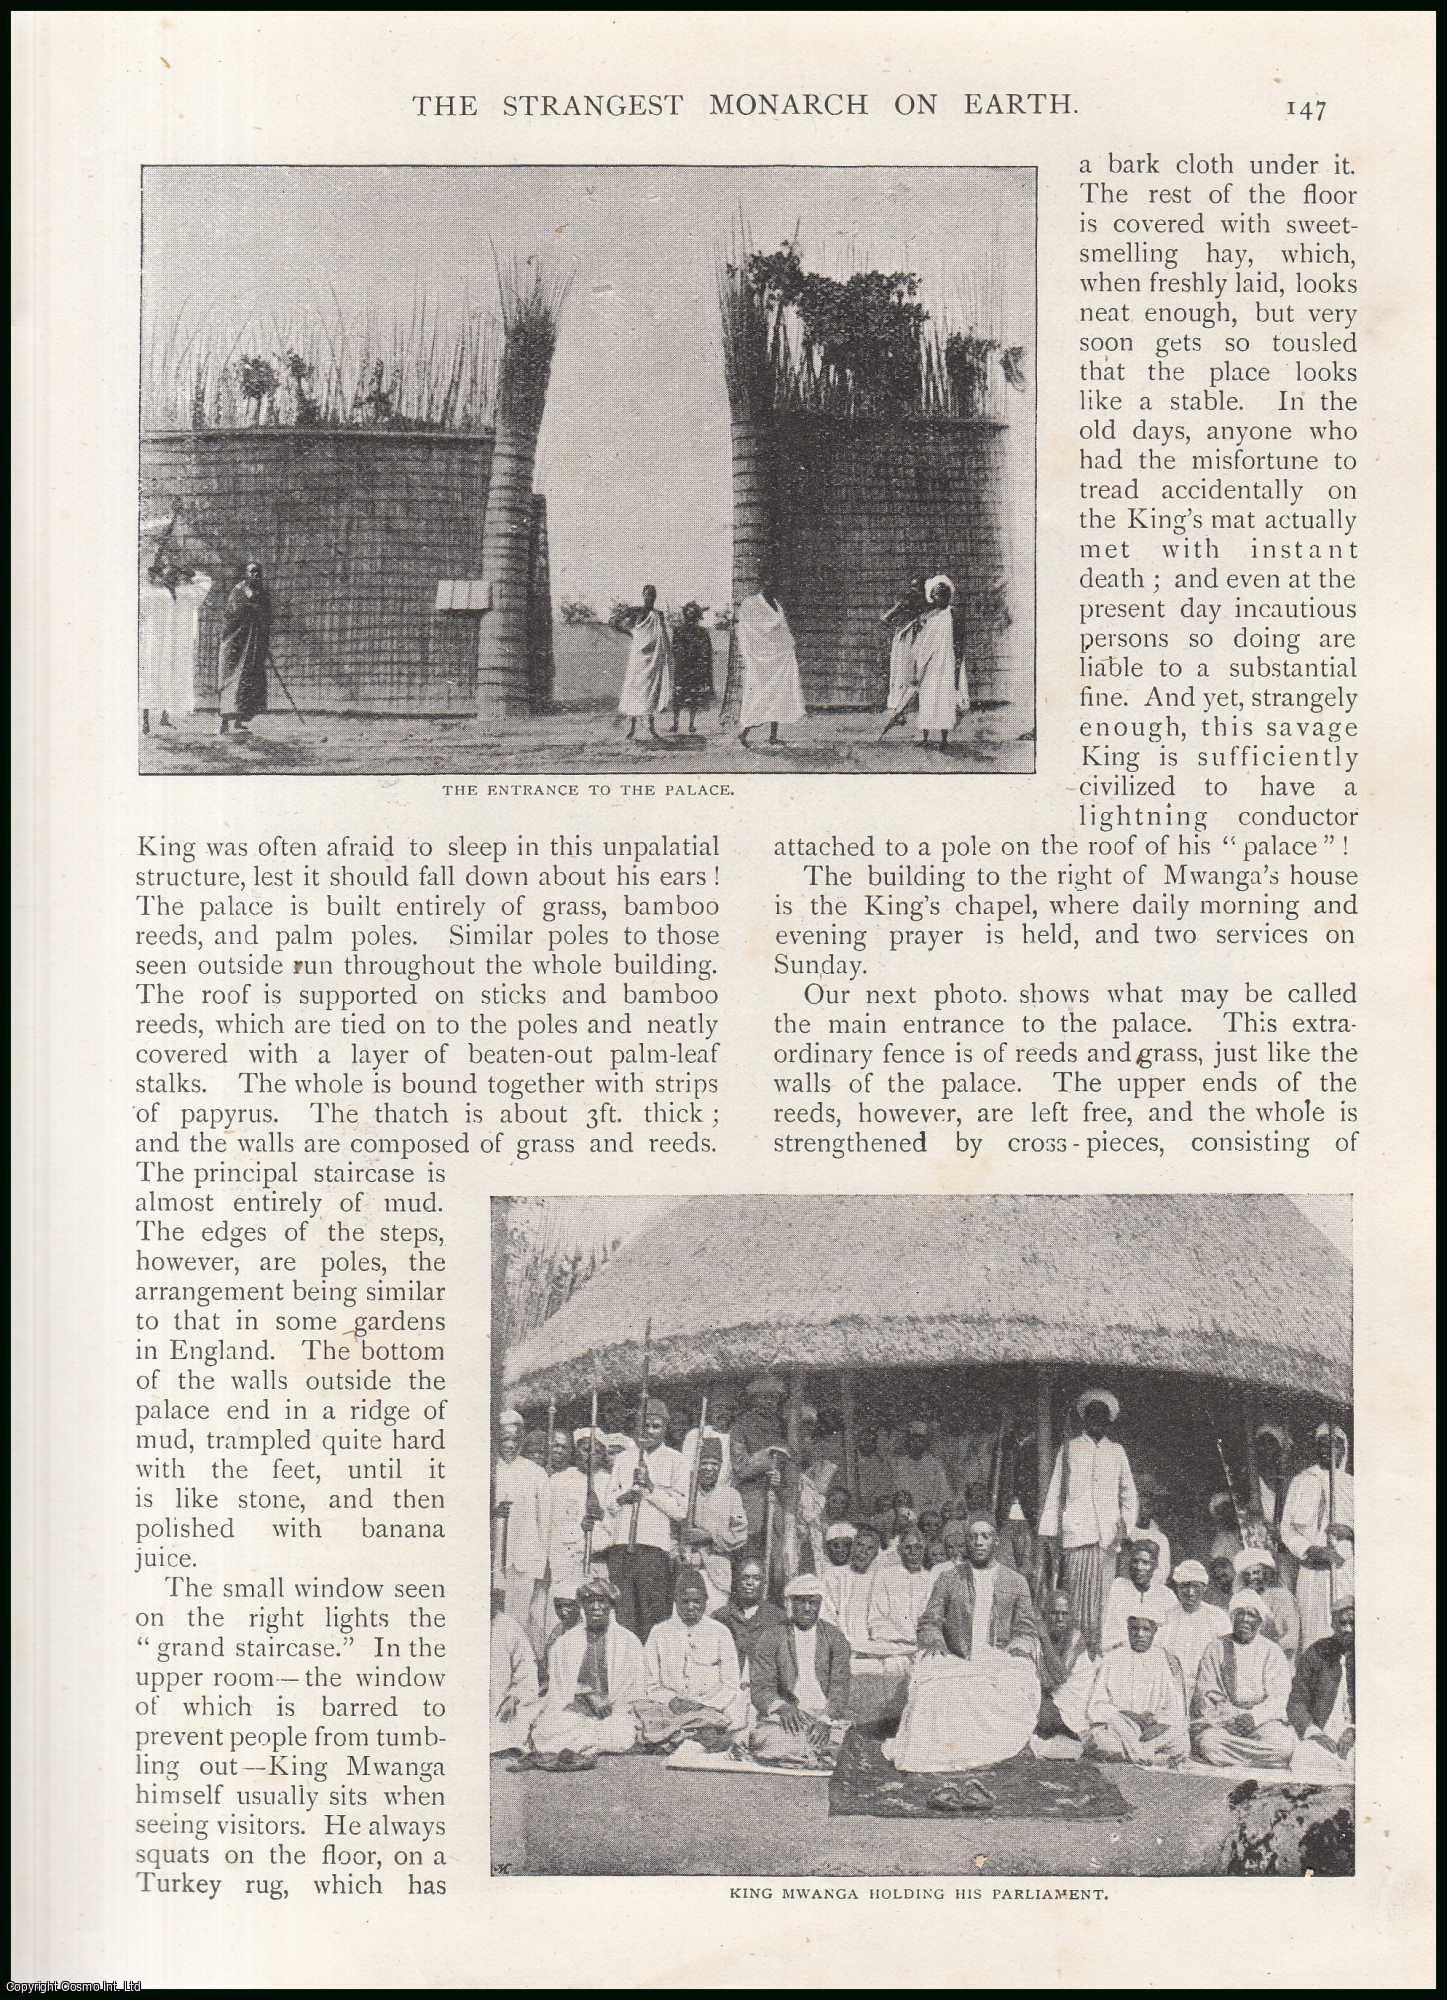 Andrew Keighley - The Strangest Monarch on Earth : Mwanga, The King of Uganda. His Palace, Parliament and Personal History.A rare original article from the Wide World Magazine, 1898.